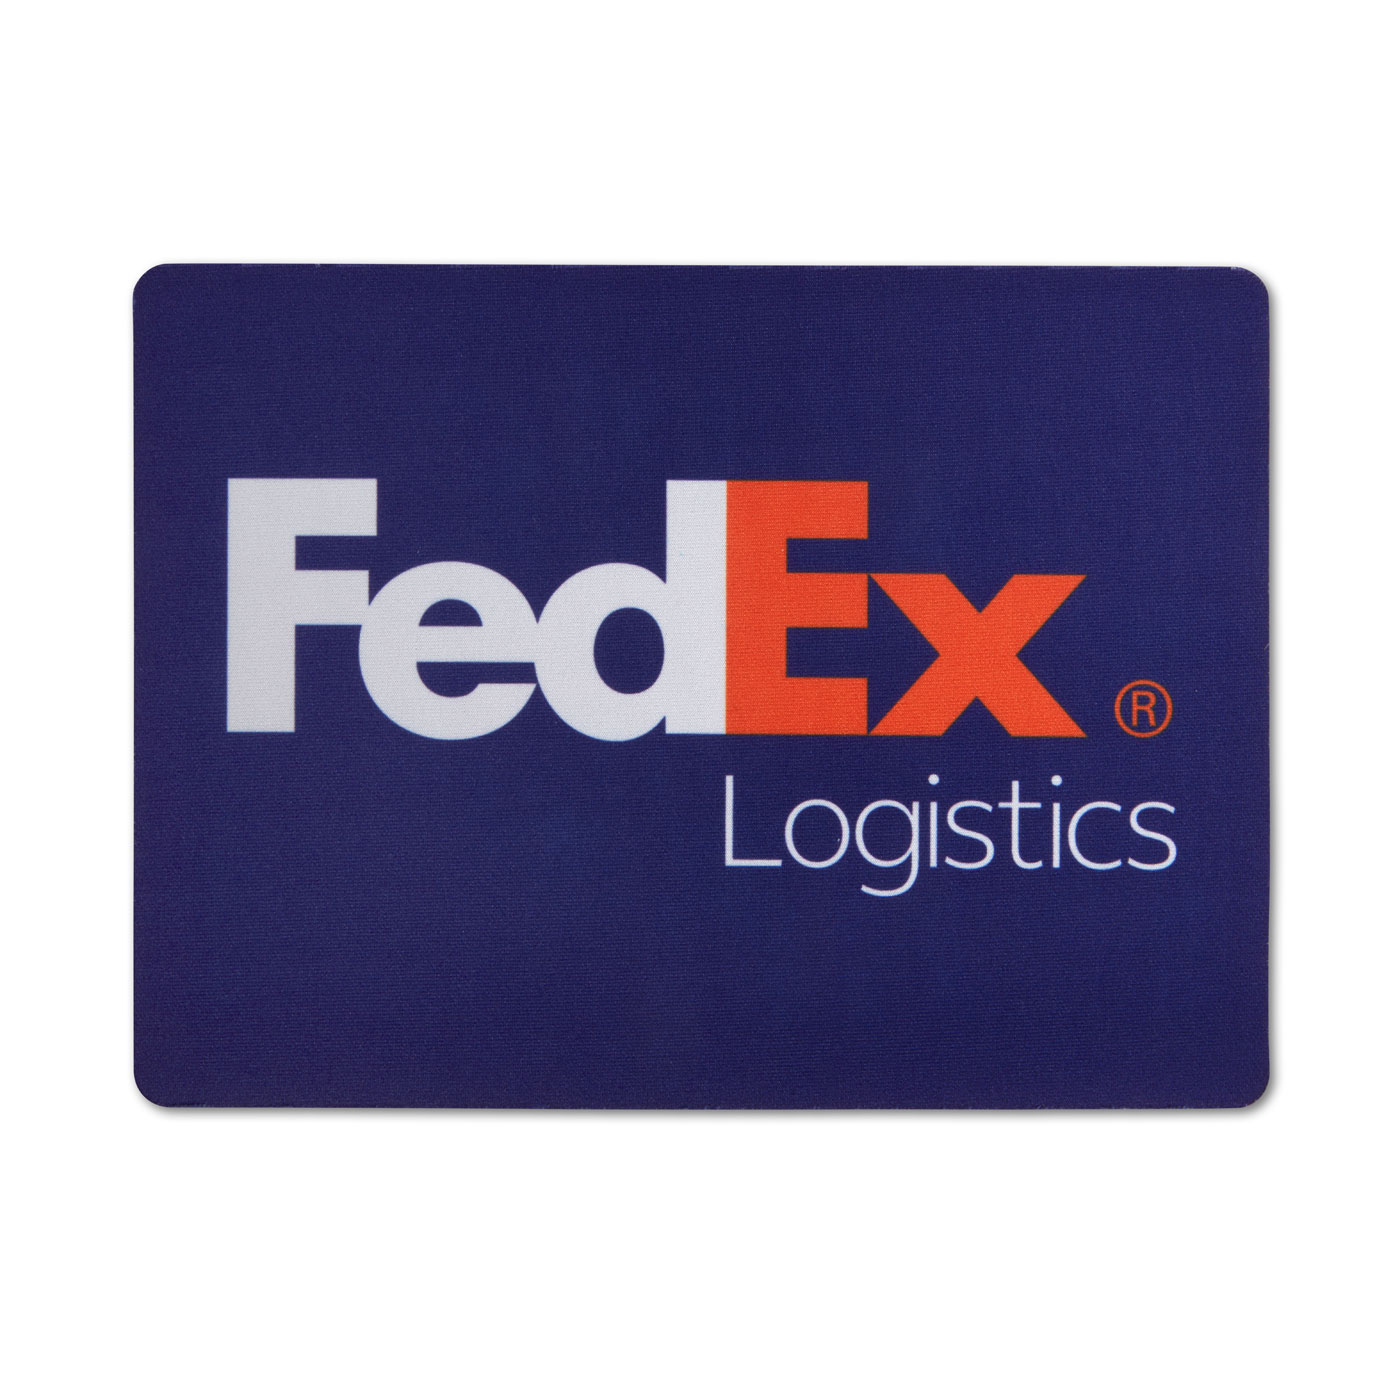 FedEx Kinkos 2006 Logo Launch Mouse Pad Advertising New in Box Fed Ex 